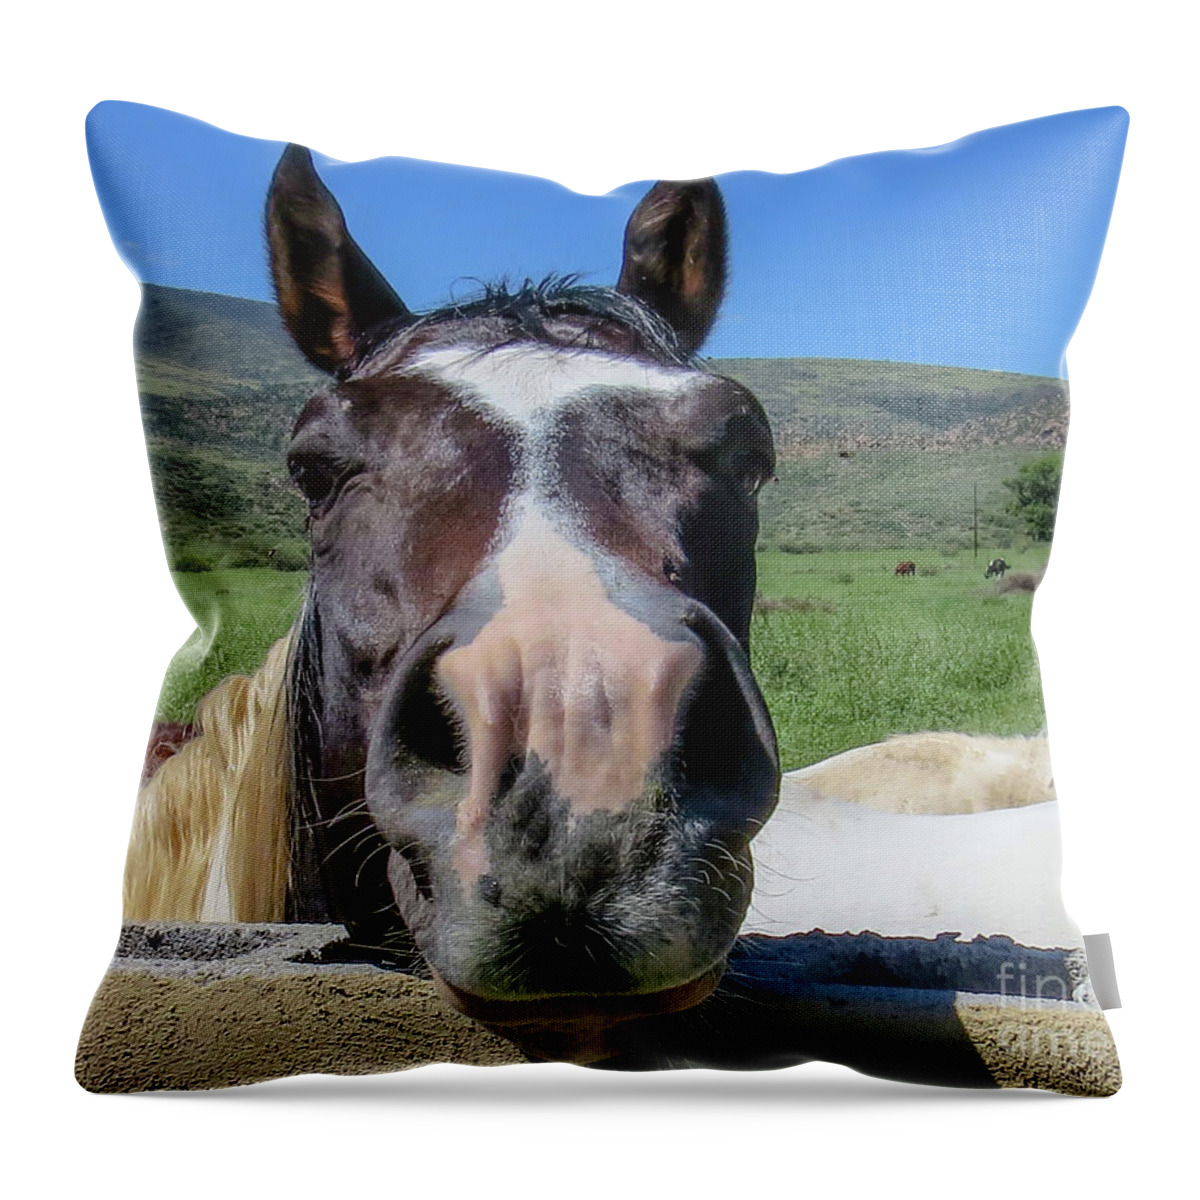 Horse Throw Pillow featuring the photograph Horse 13 by Christy Garavetto